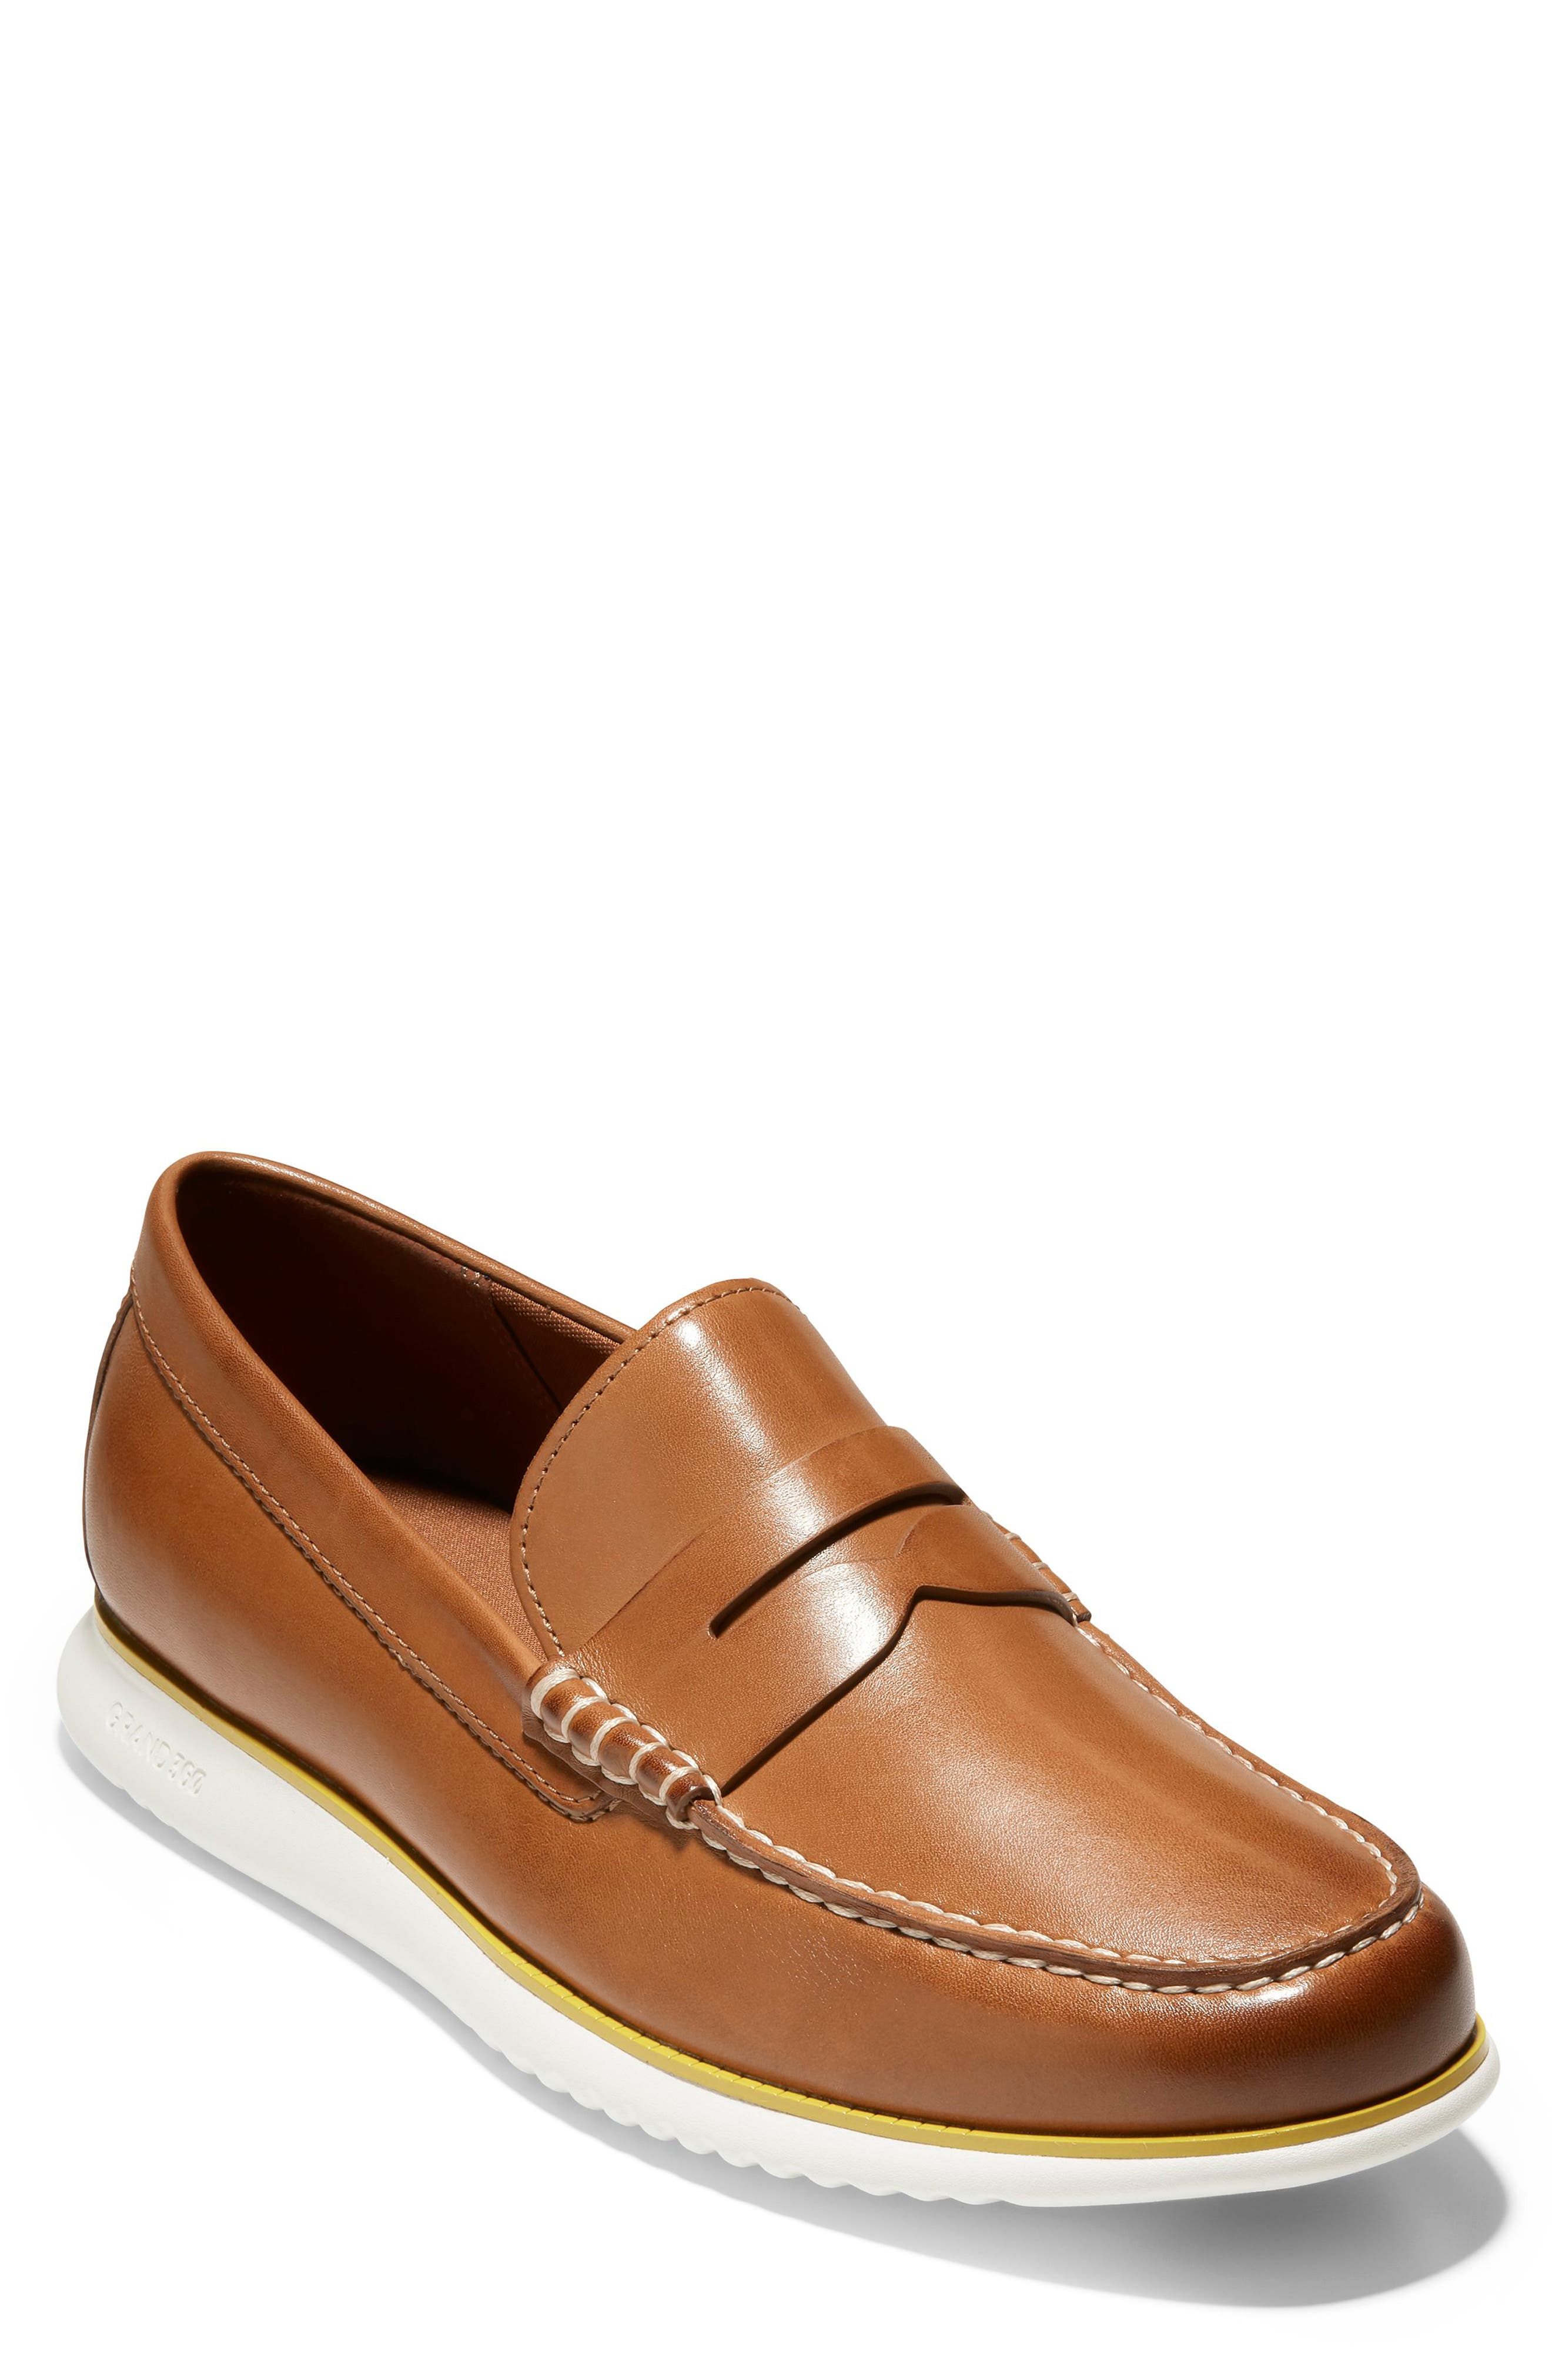 COLE HAAN ZEROGRAND PENNY LOAFER,194736321178